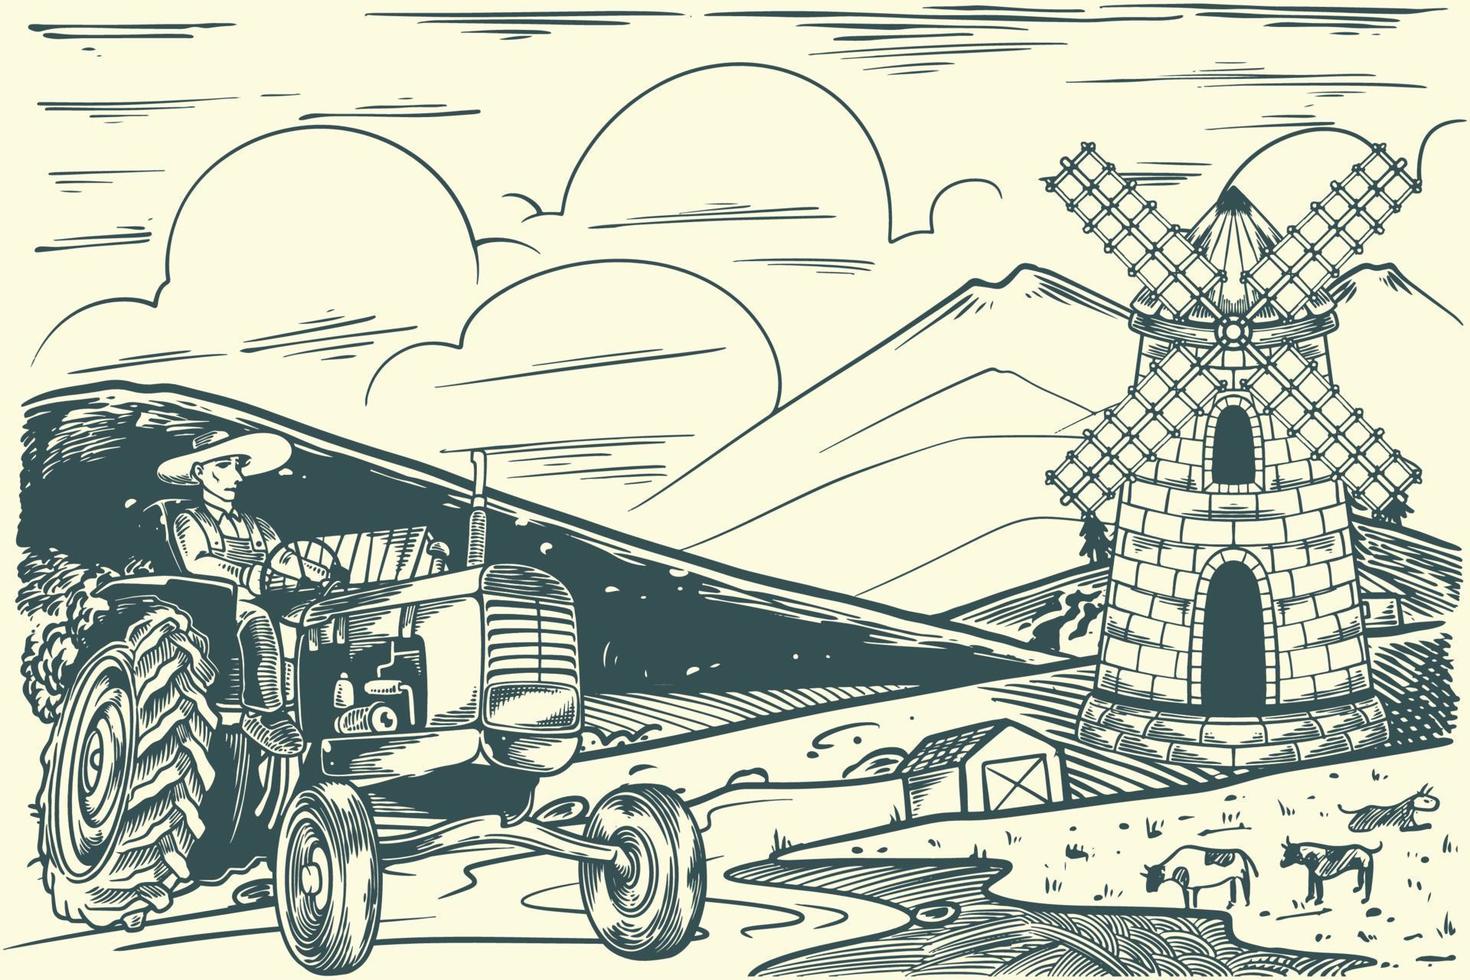 Hand drawing rural agriculture landscape with windmill and tractors vector